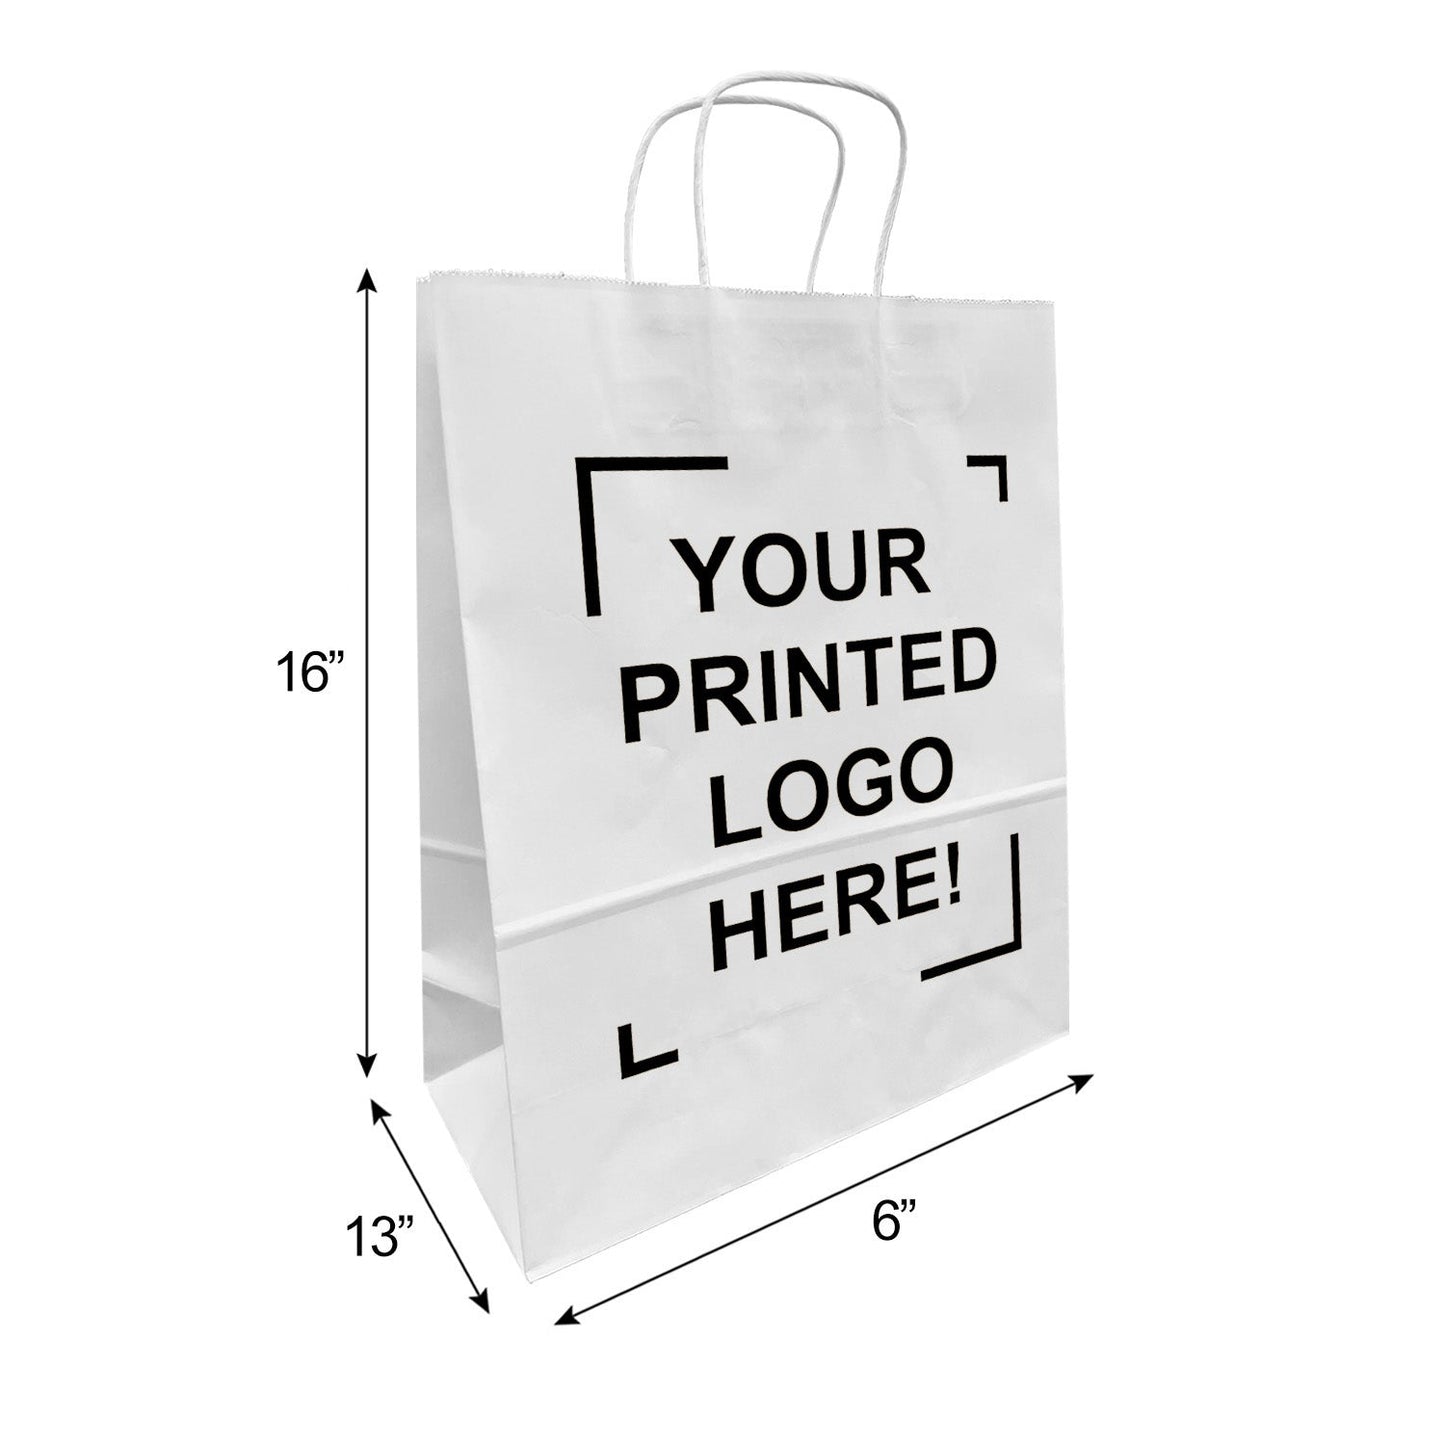 250 Pcs, Traveler, 13x6x16 inches, White Paper Bags, with Twisted Handle, Full Color Custom Print